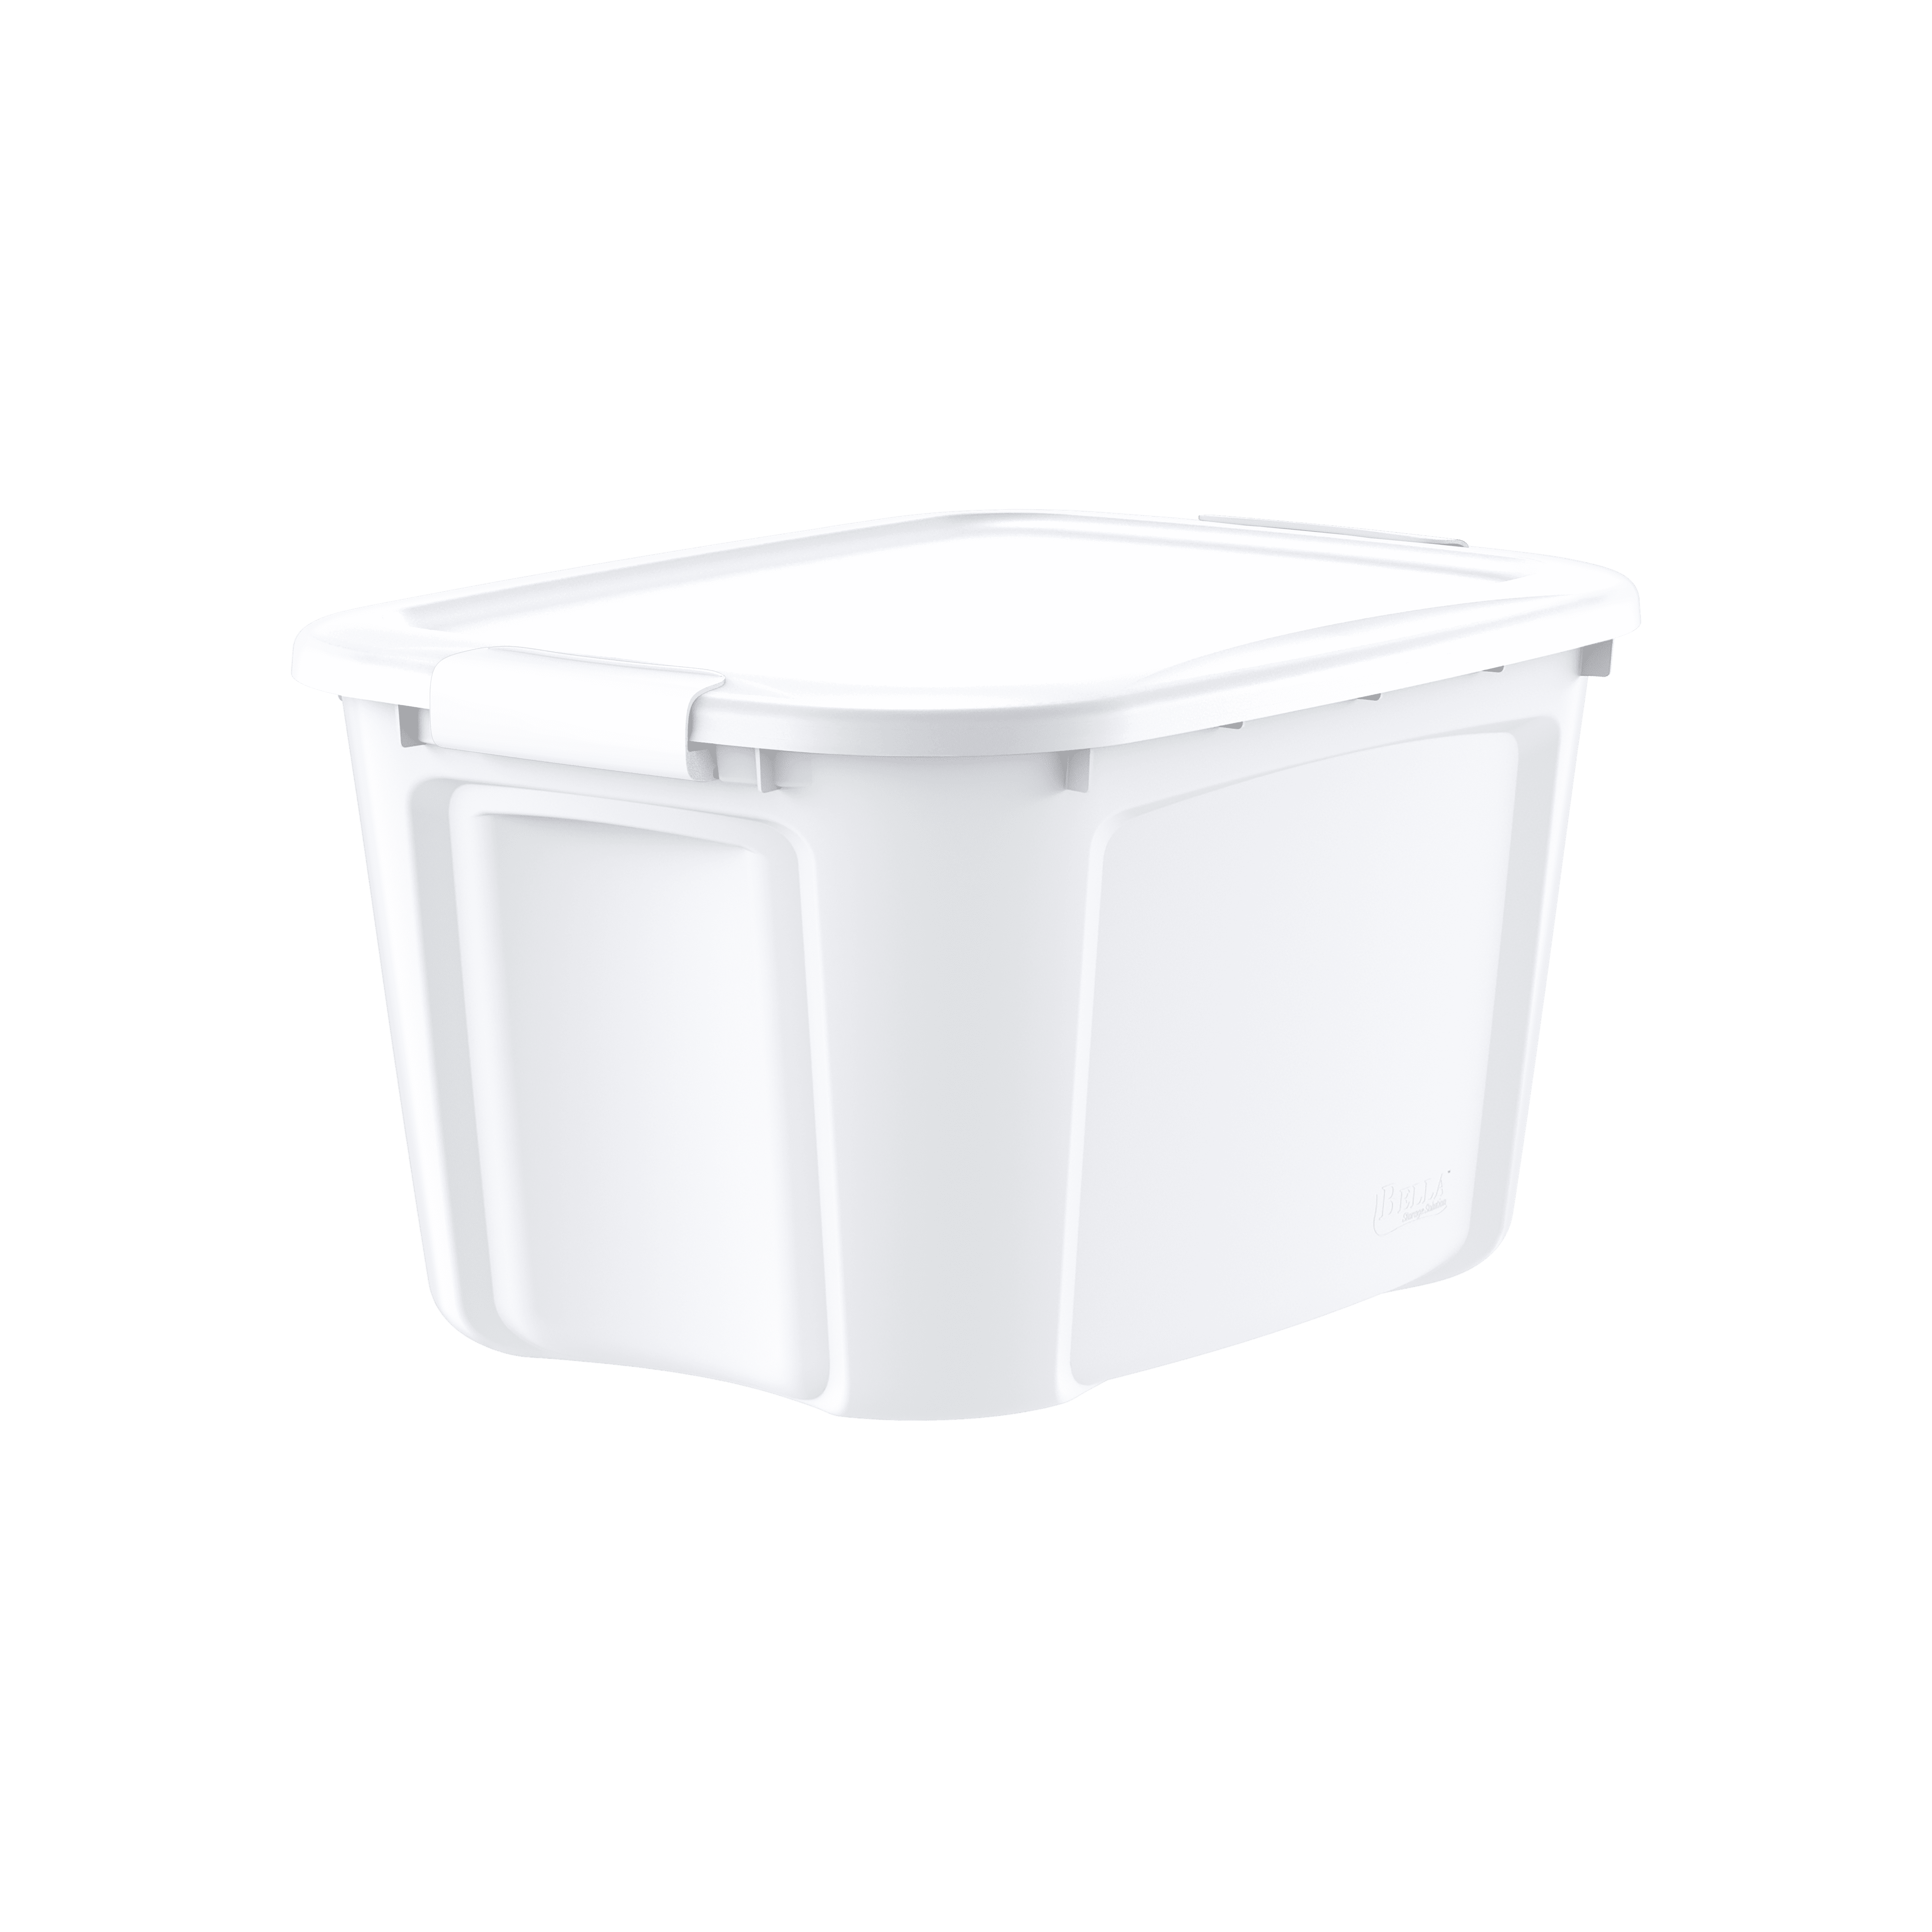 Bella 20-Gal. Tote with Locking Lid - Clear